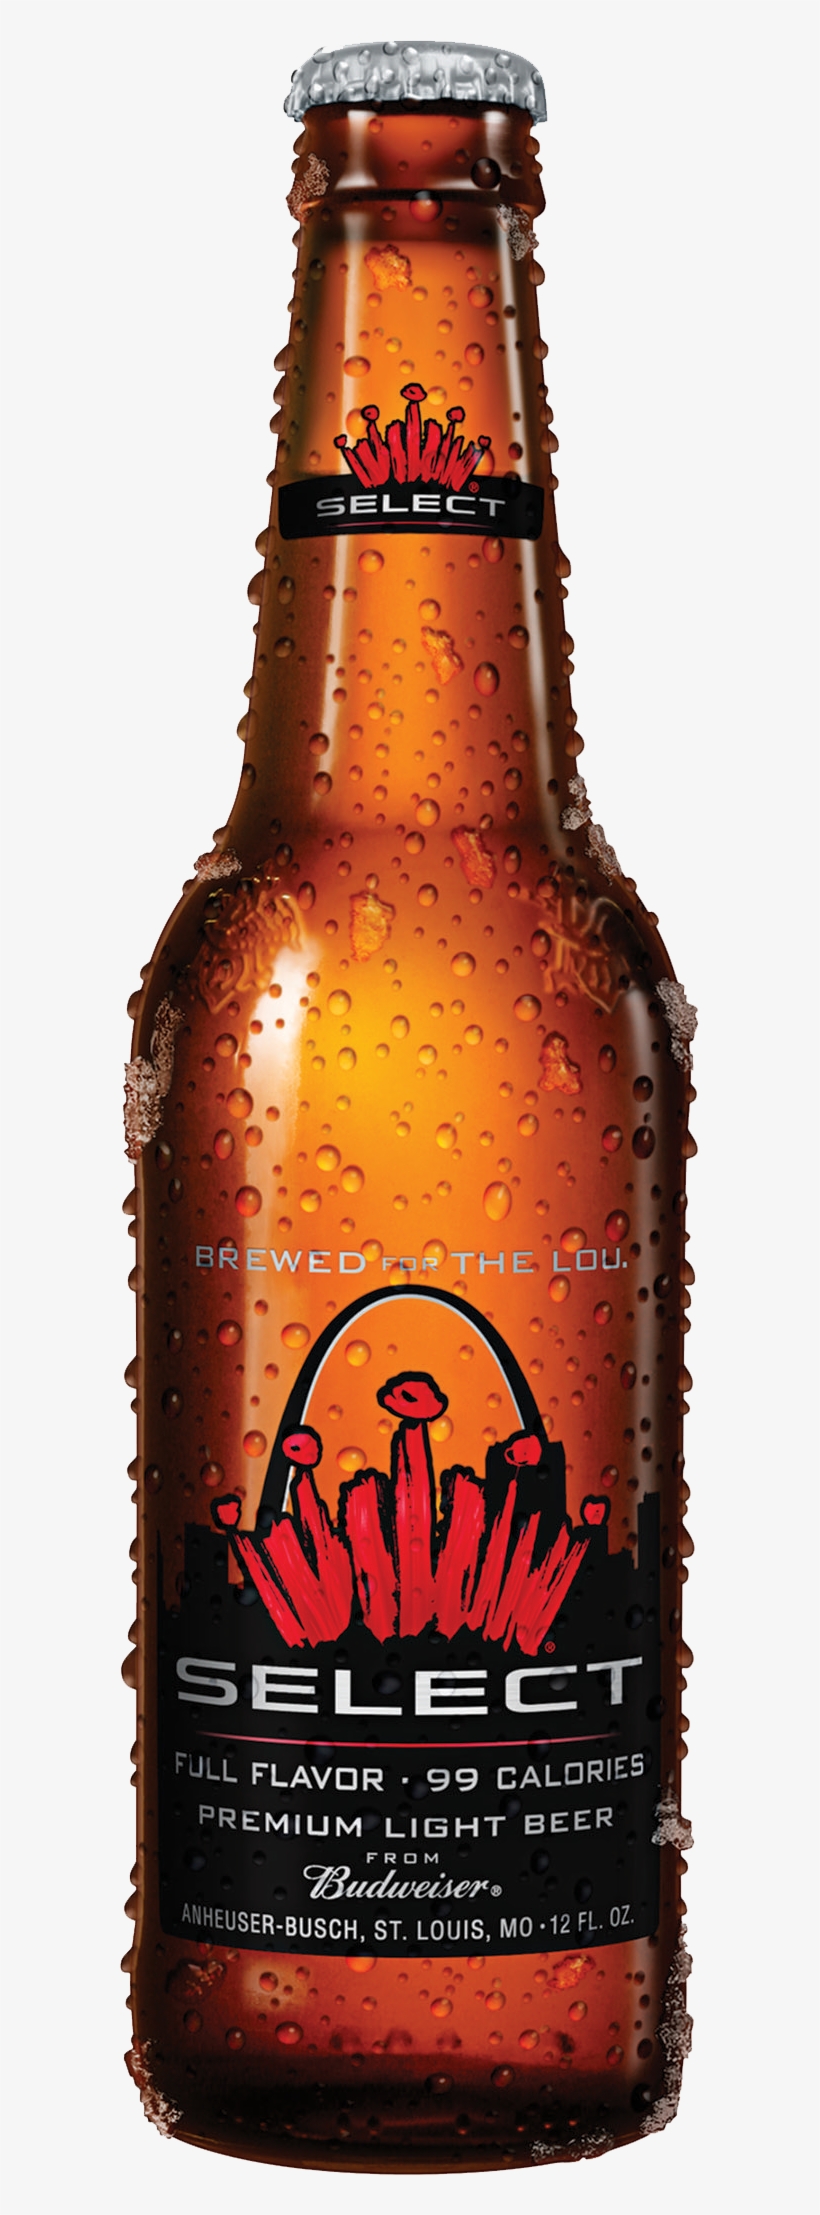 Budweiser Select - Bud Select Brewed For The Lou, transparent png #1527593